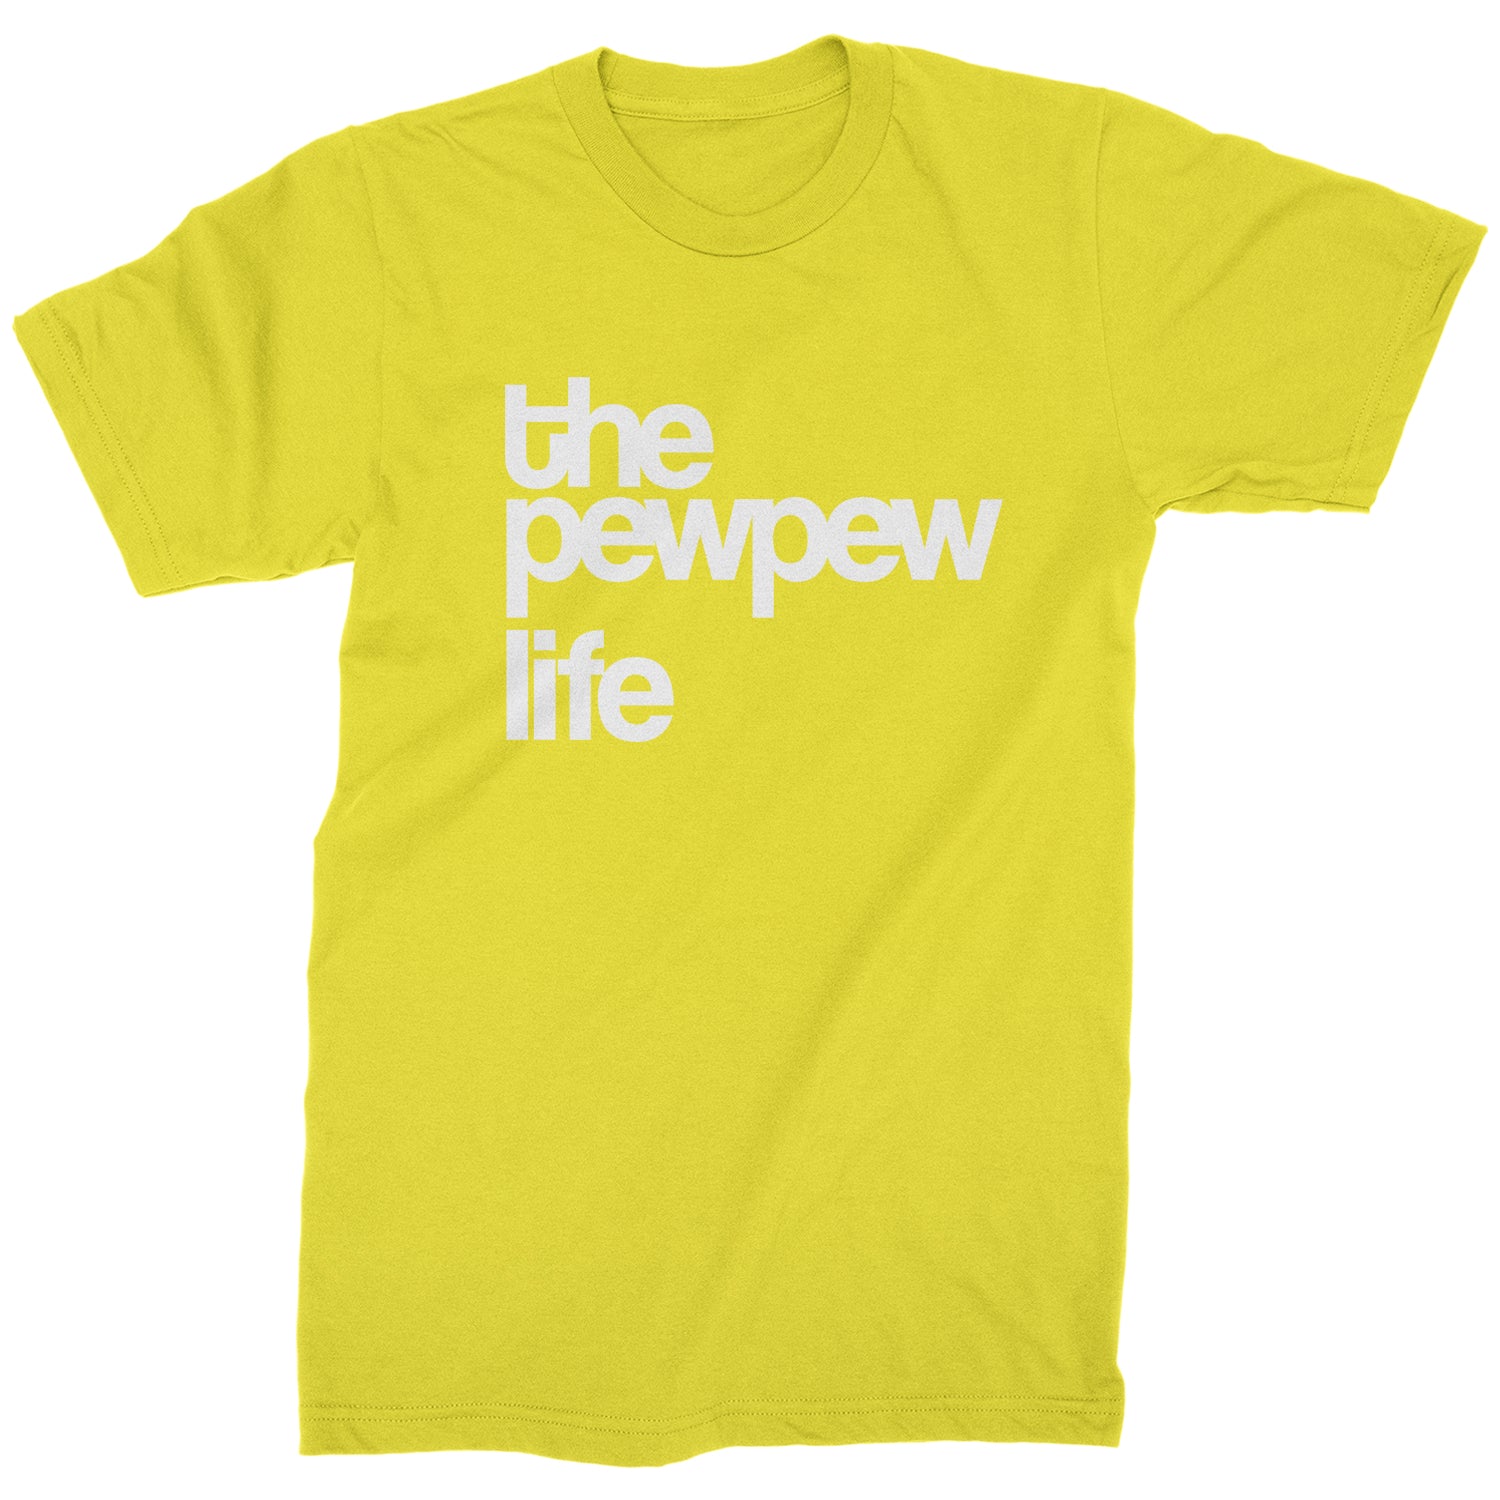 The PewPew Pew Pew Life Gun Rights Mens T-shirt #expressiontees by Expression Tees